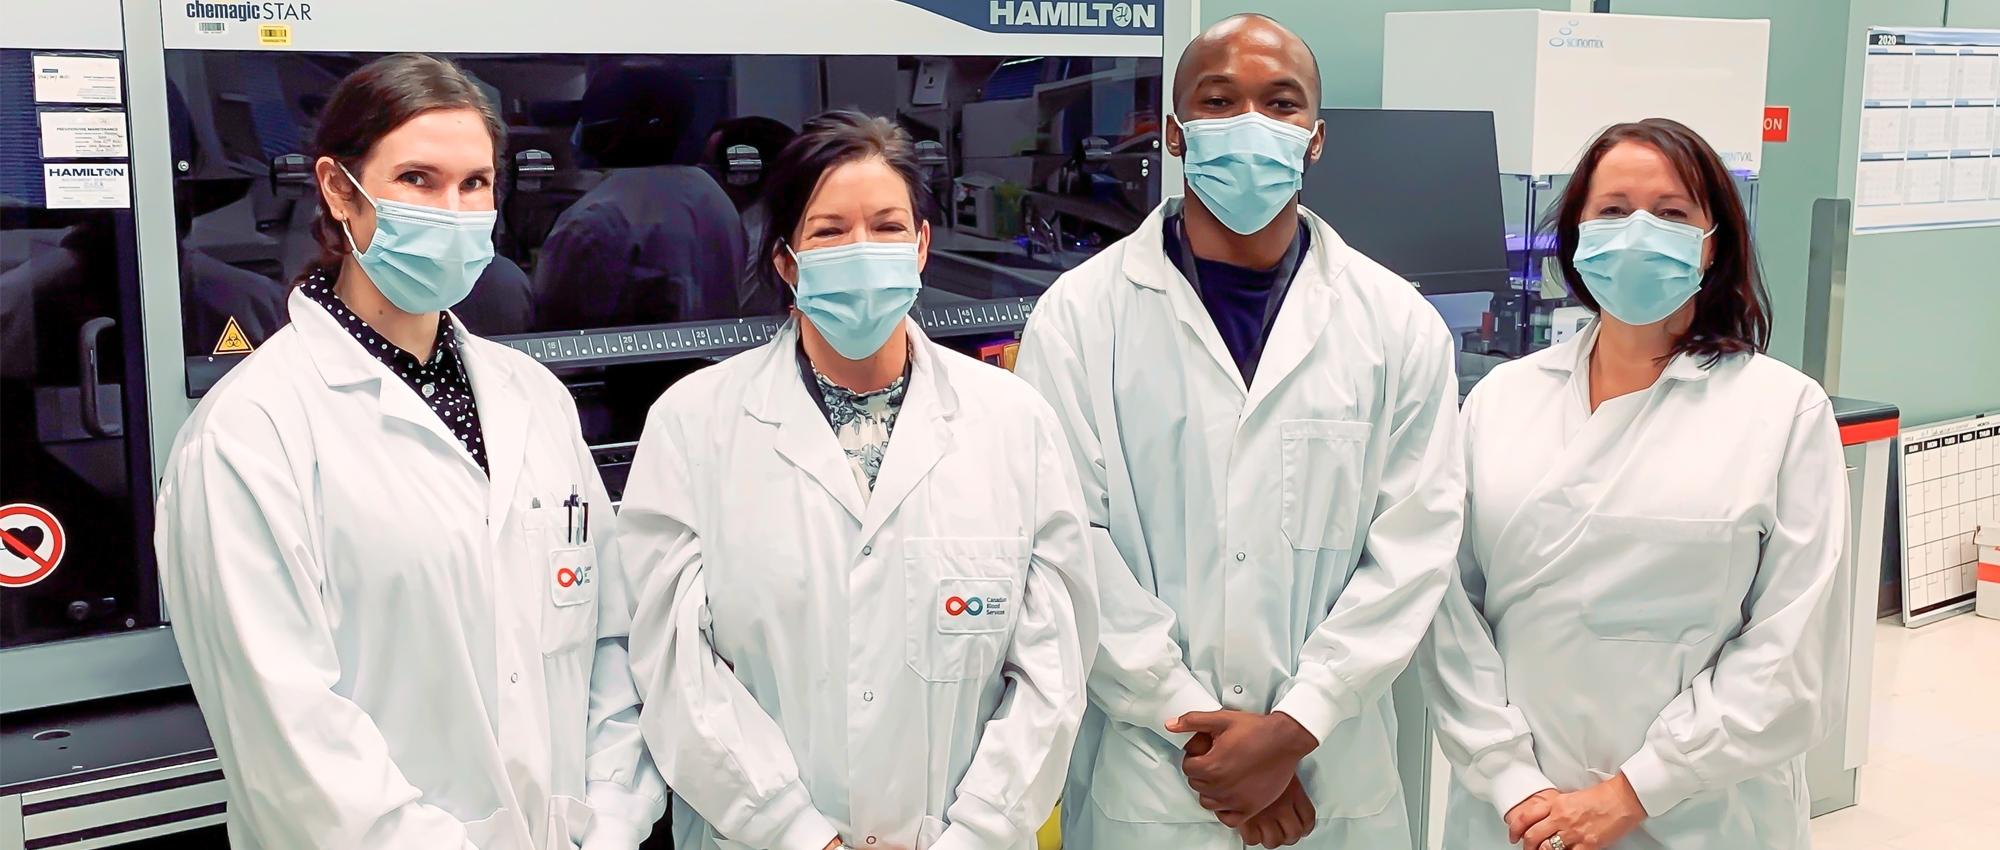 Featured image of lab team members Stacey Vitali, Carissa Kohnen, Andy Tshiula Kalenga and Valerie Conrod standing together in front of a Hamilton machine wearing masks.